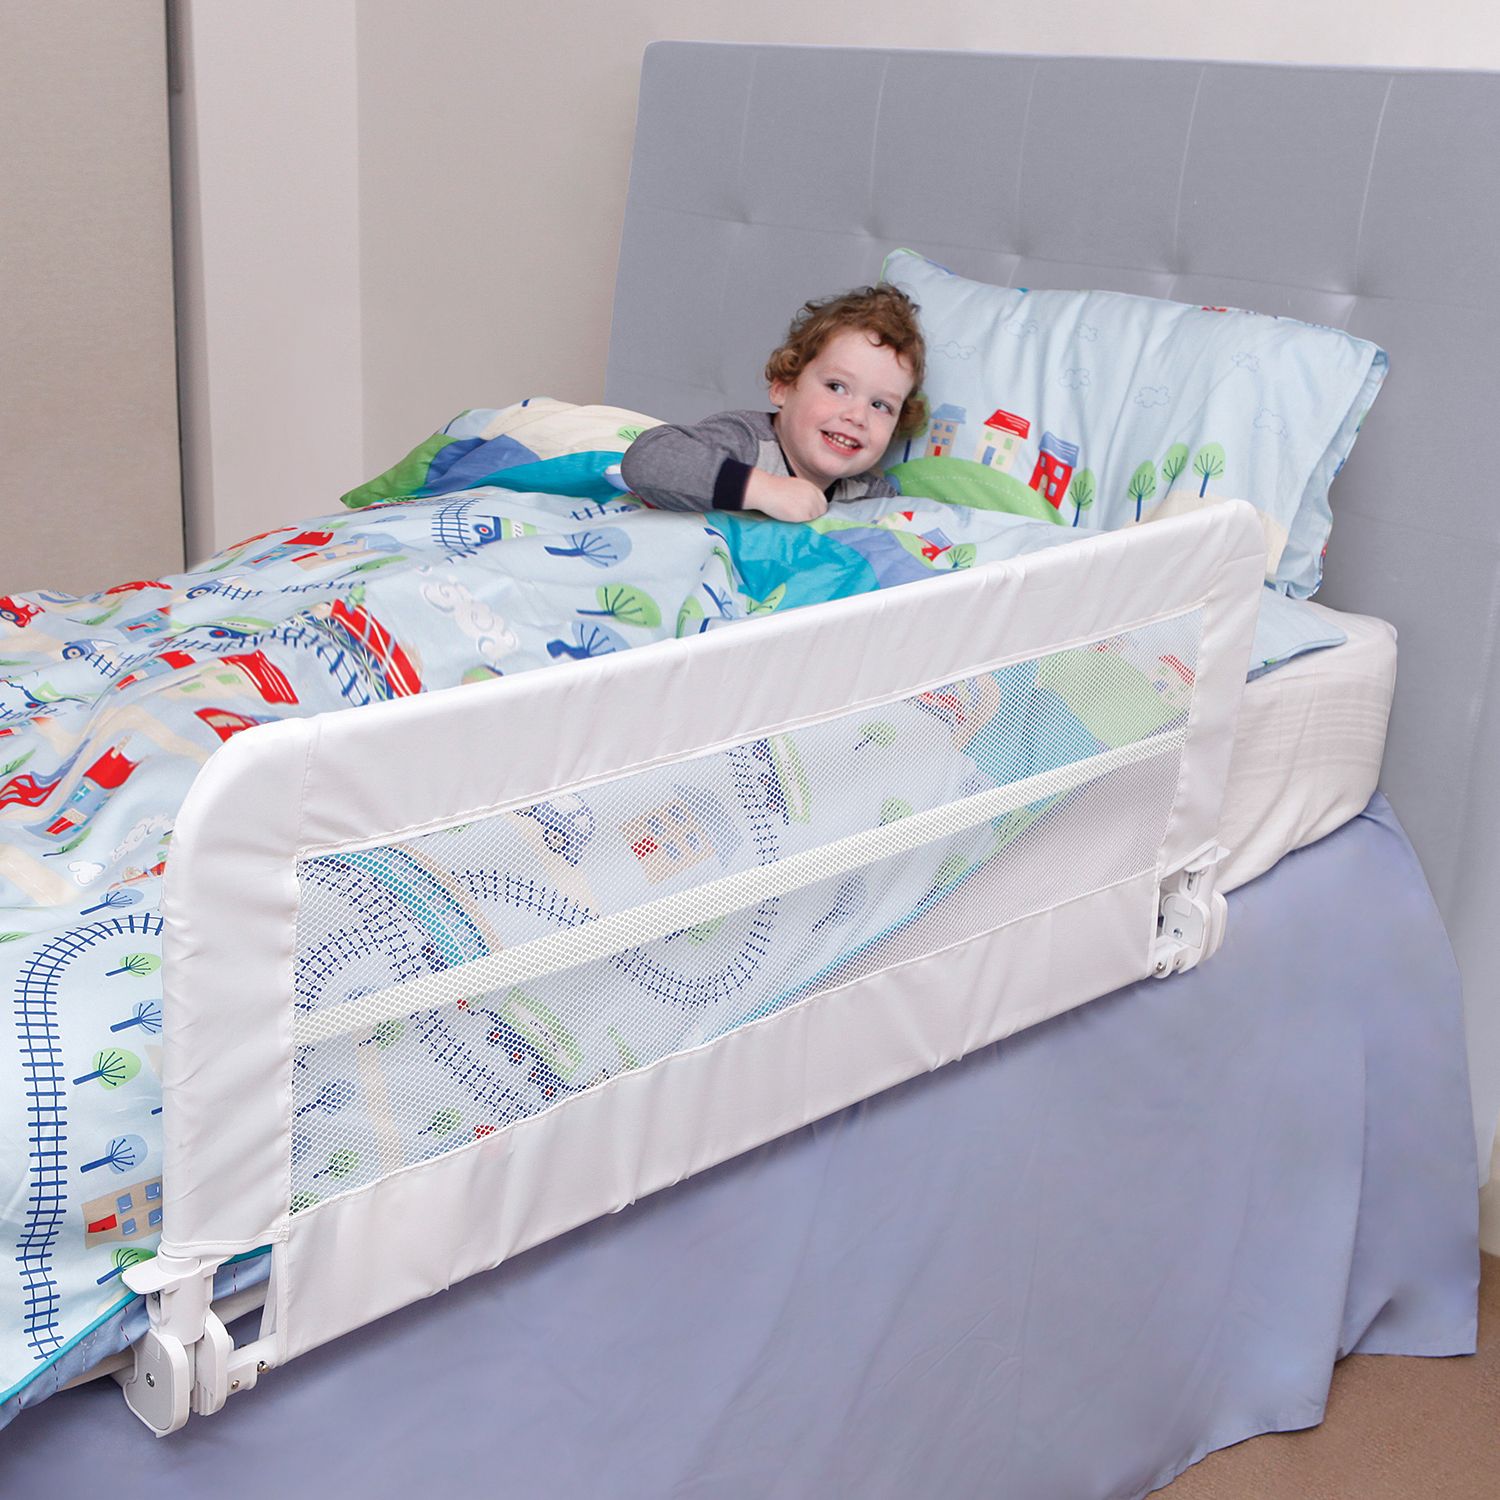 Image for Dreambaby Savoy Fold Down Bed Rail at Kohl's.